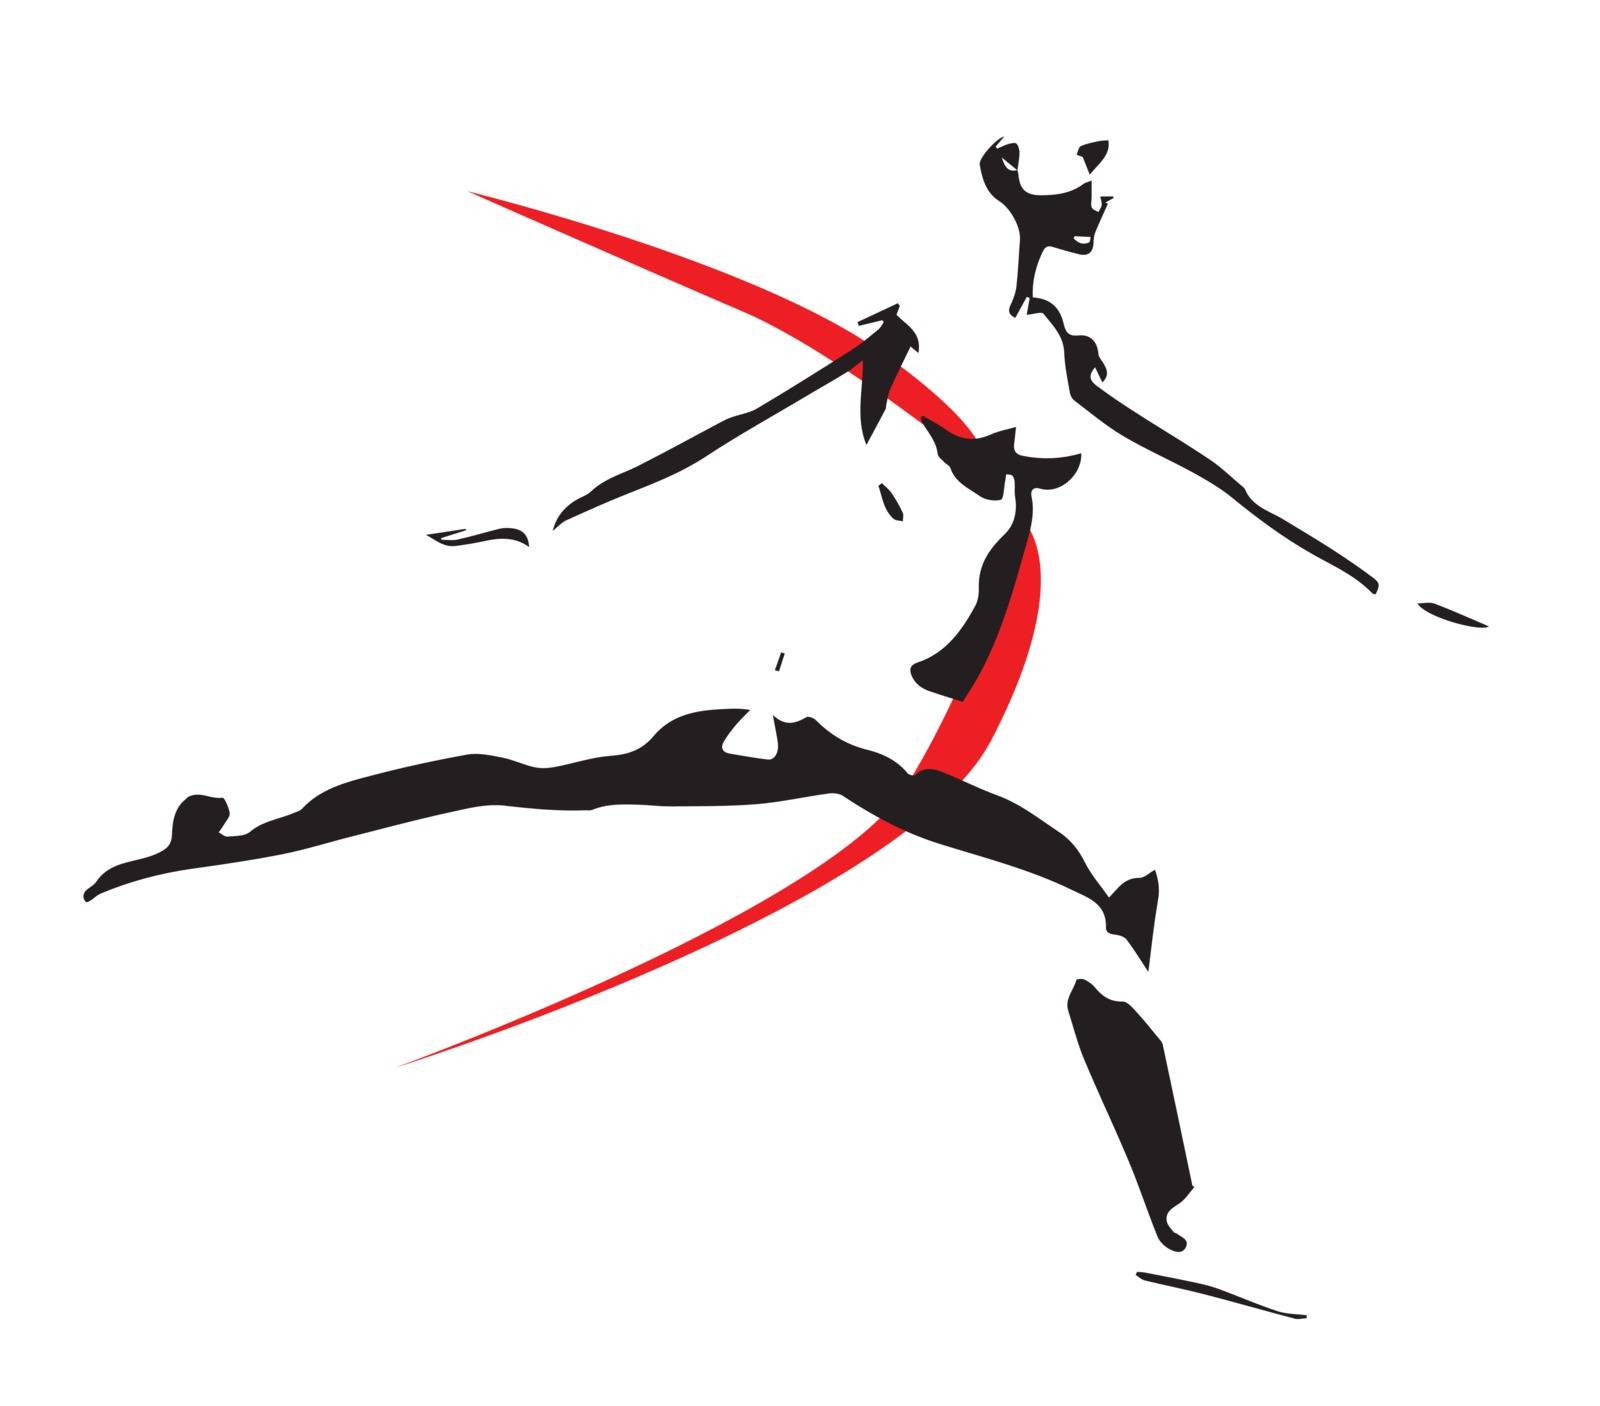 Black and white outline of a runner over a white background breaking the red ribbon